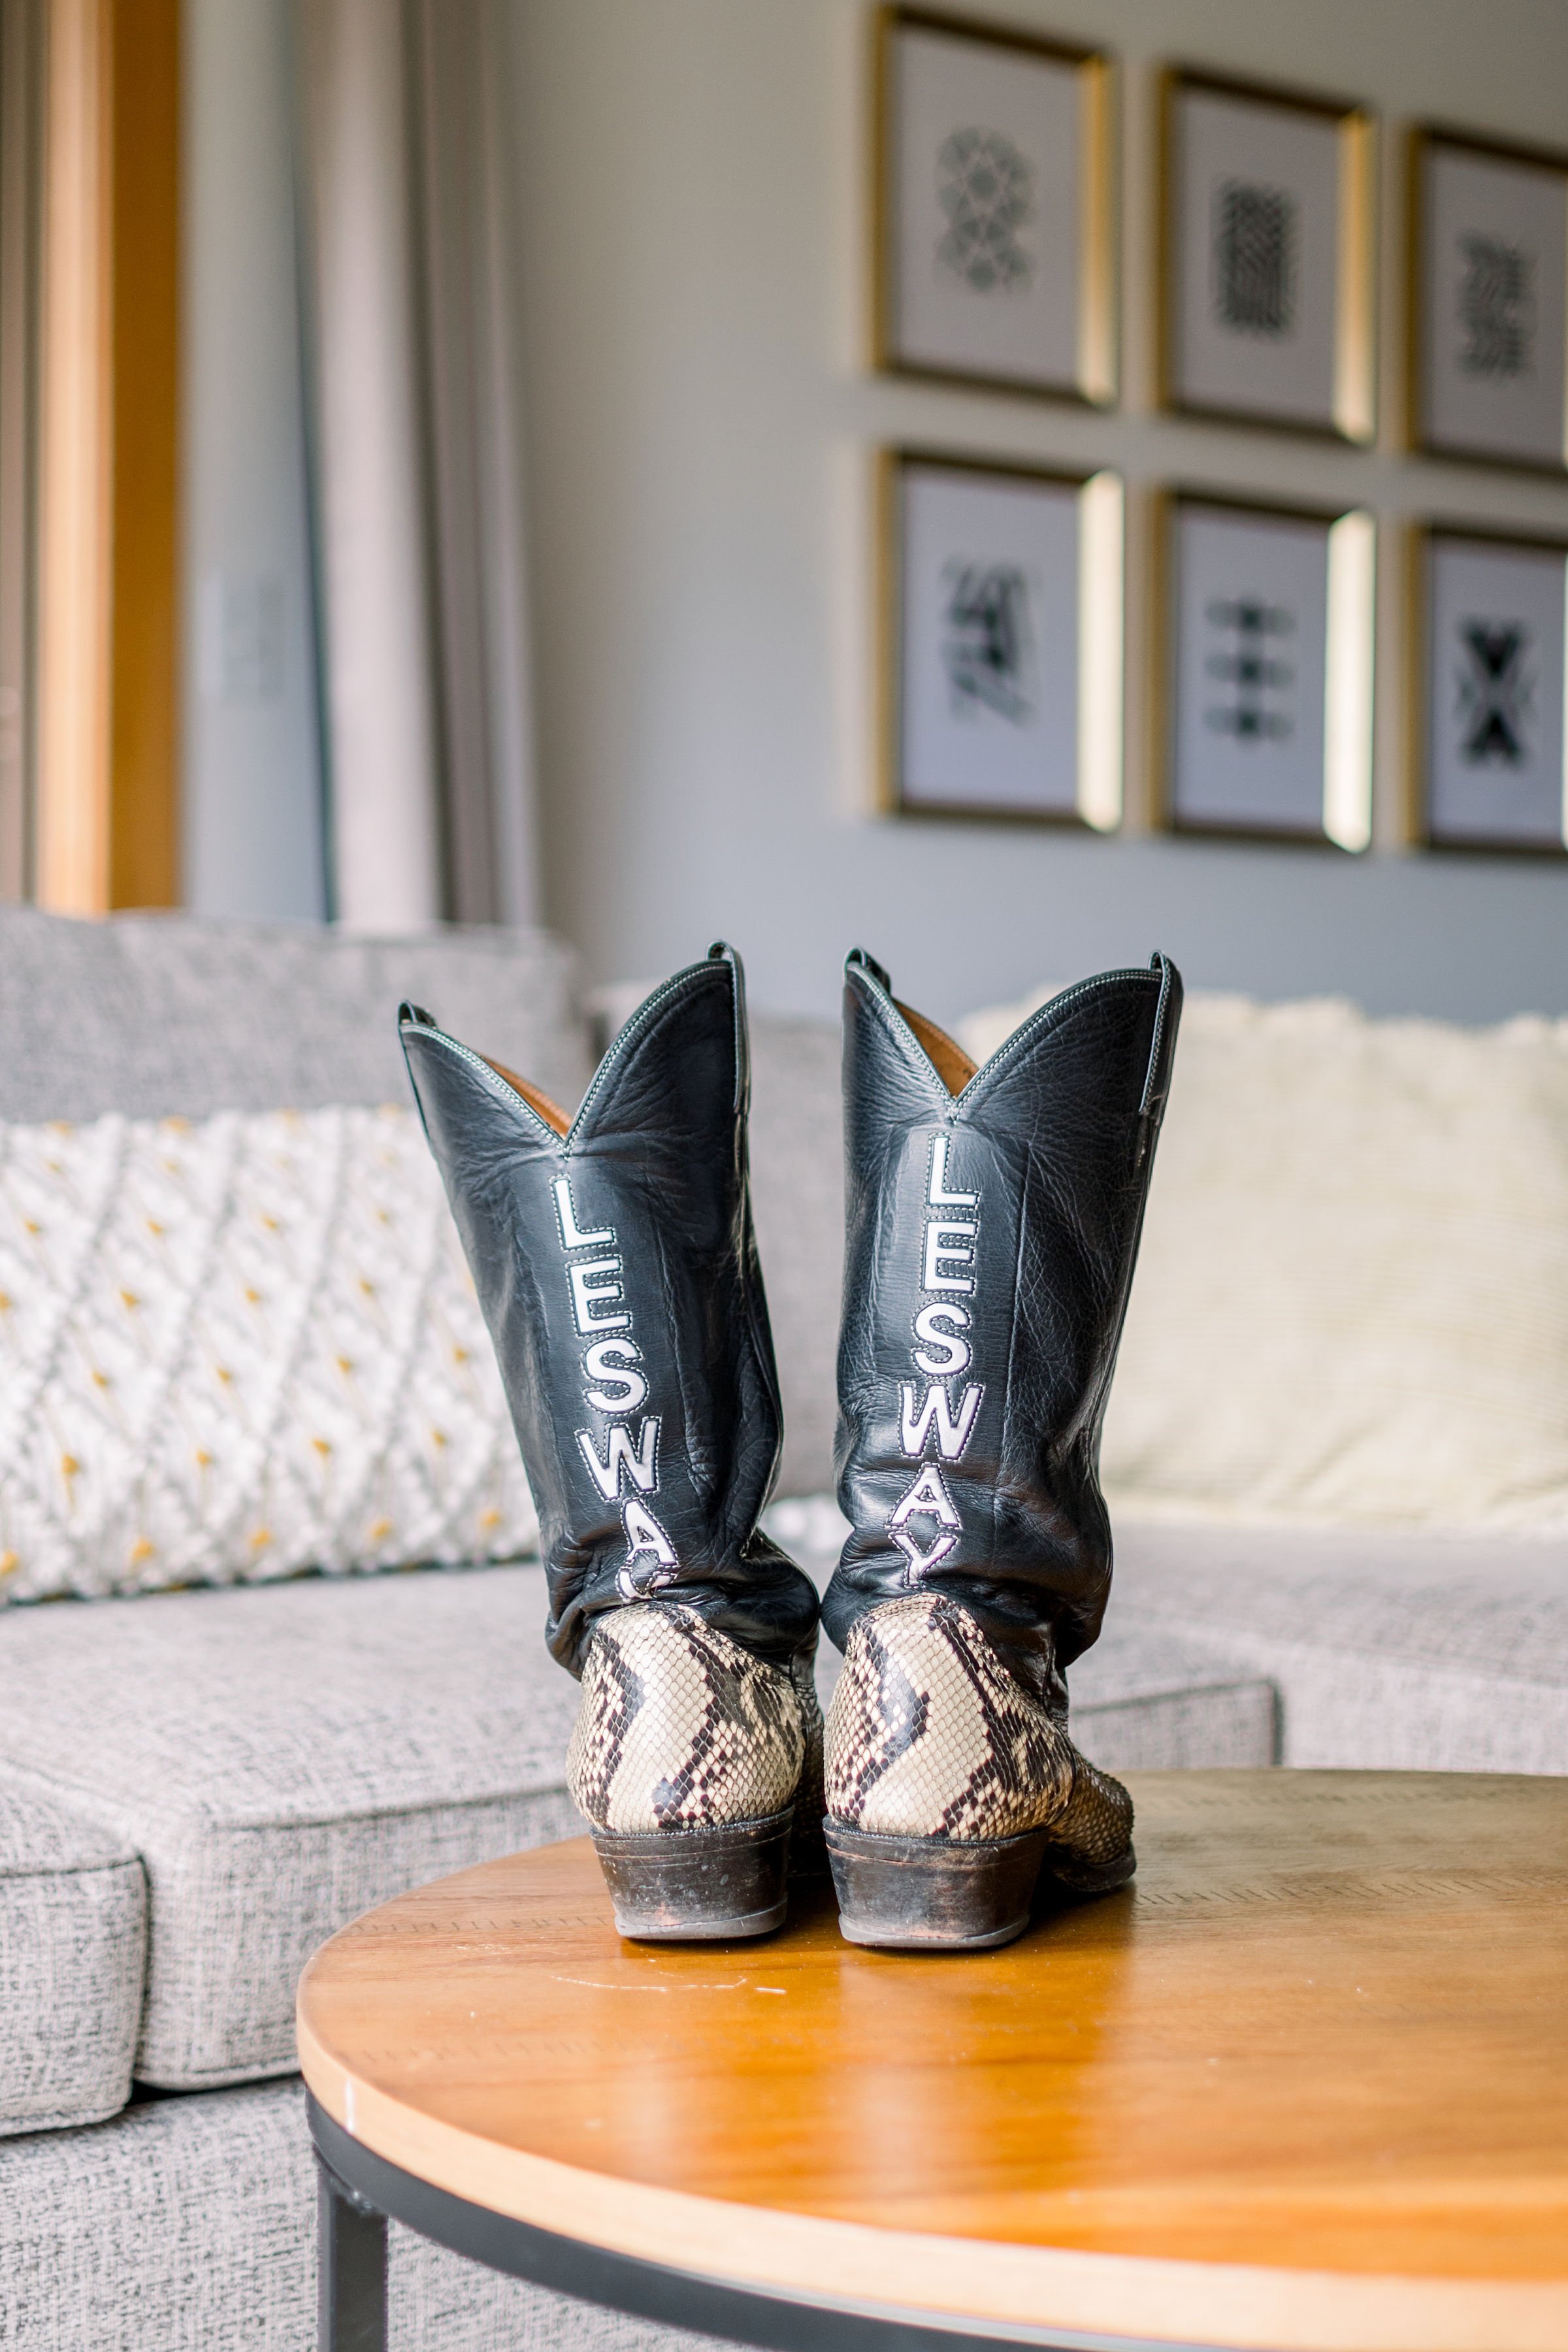  Grooms boots with his last name on the back of the boots by Chelsea Mason Photography. groom boots wedding cowboy boots #Albertaweddings #shesaidyes #Albertaweddingphotographers #SilvertipGolfCourse #ChelseaMasonPhotography #ChelseaMasonWeddings  